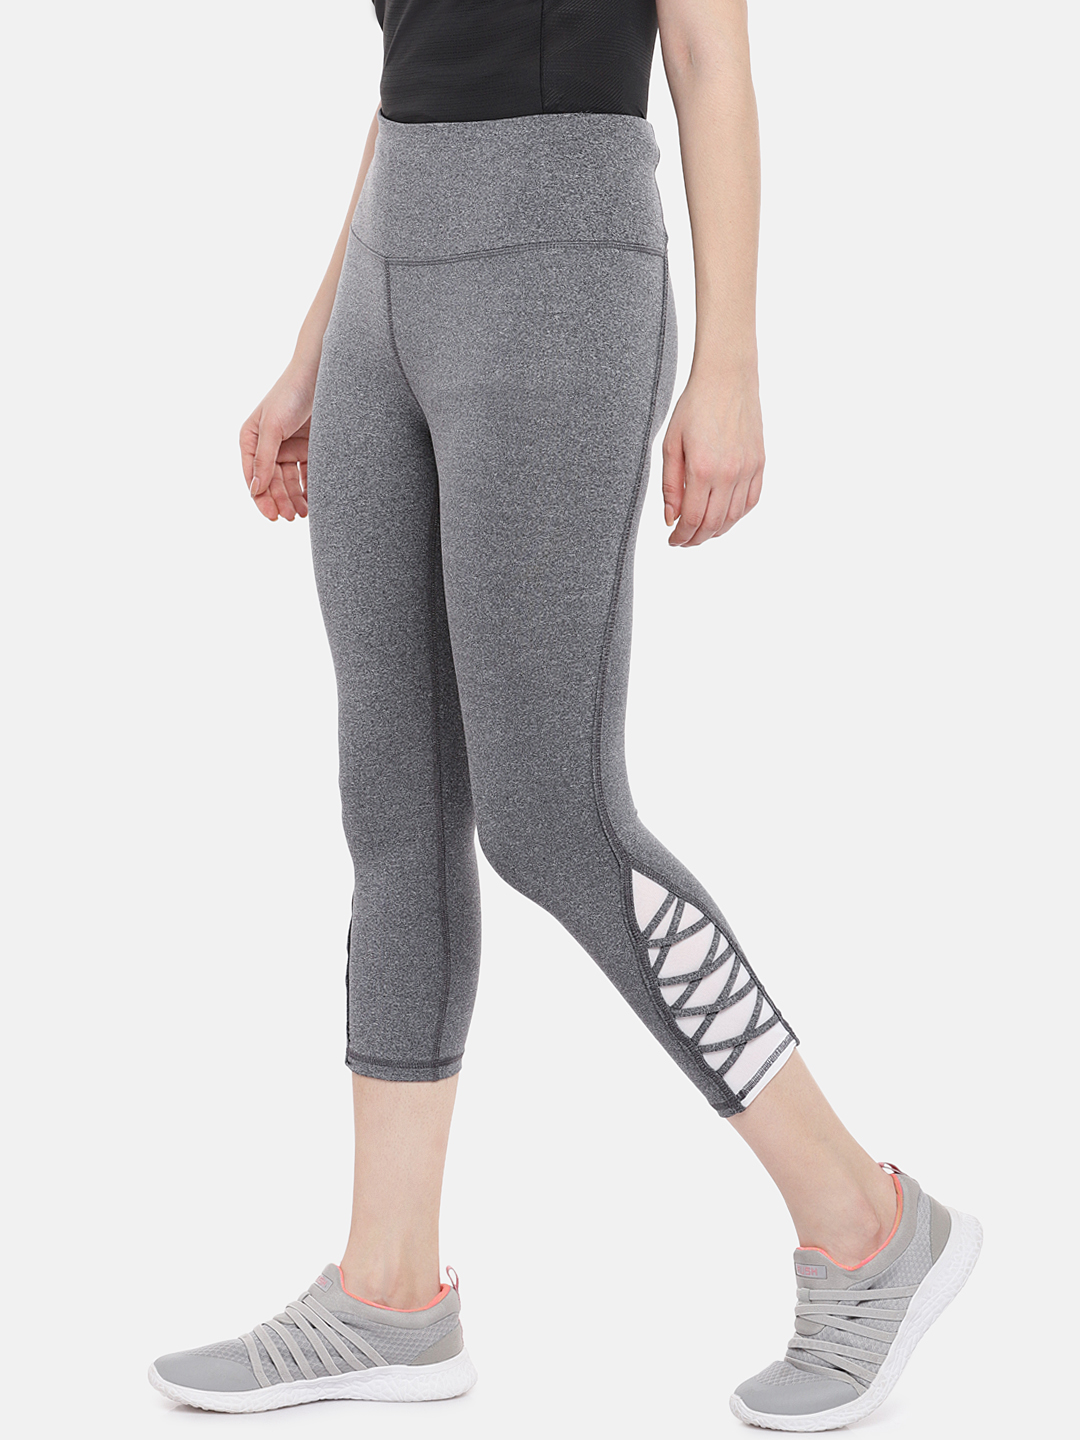 ARX active | Athleisure Wear| Trendy Sports Leggings | Fitness with Comfort